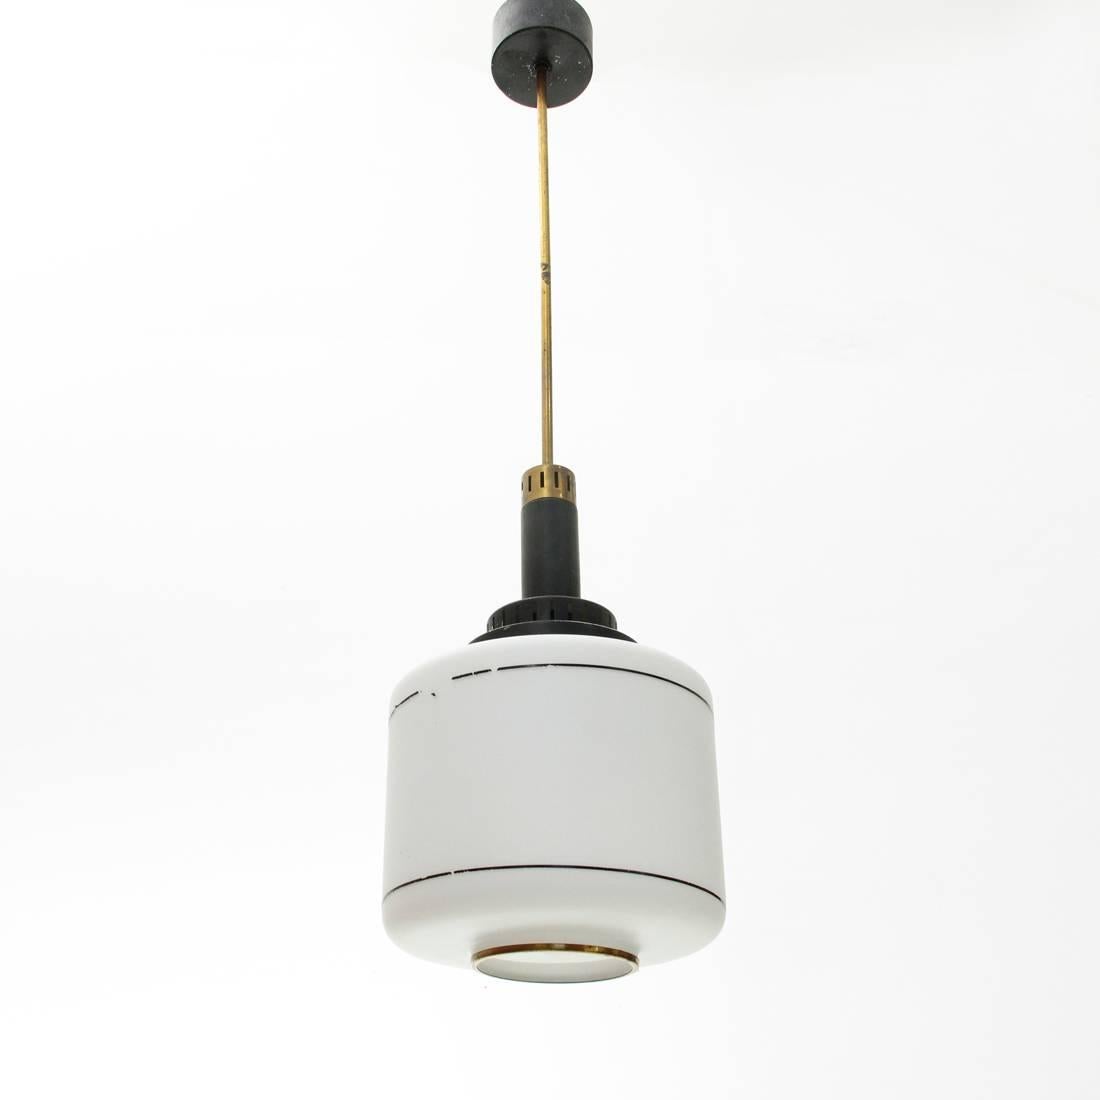 Italian manufacture chandelier from the 1950s.
Black painted aluminum ceiling rose.
Brass stem.
Diffuser in brass, black painted aluminum and white opal glass.
Good general conditions, some signs due to normal use over time.

Dimensions: